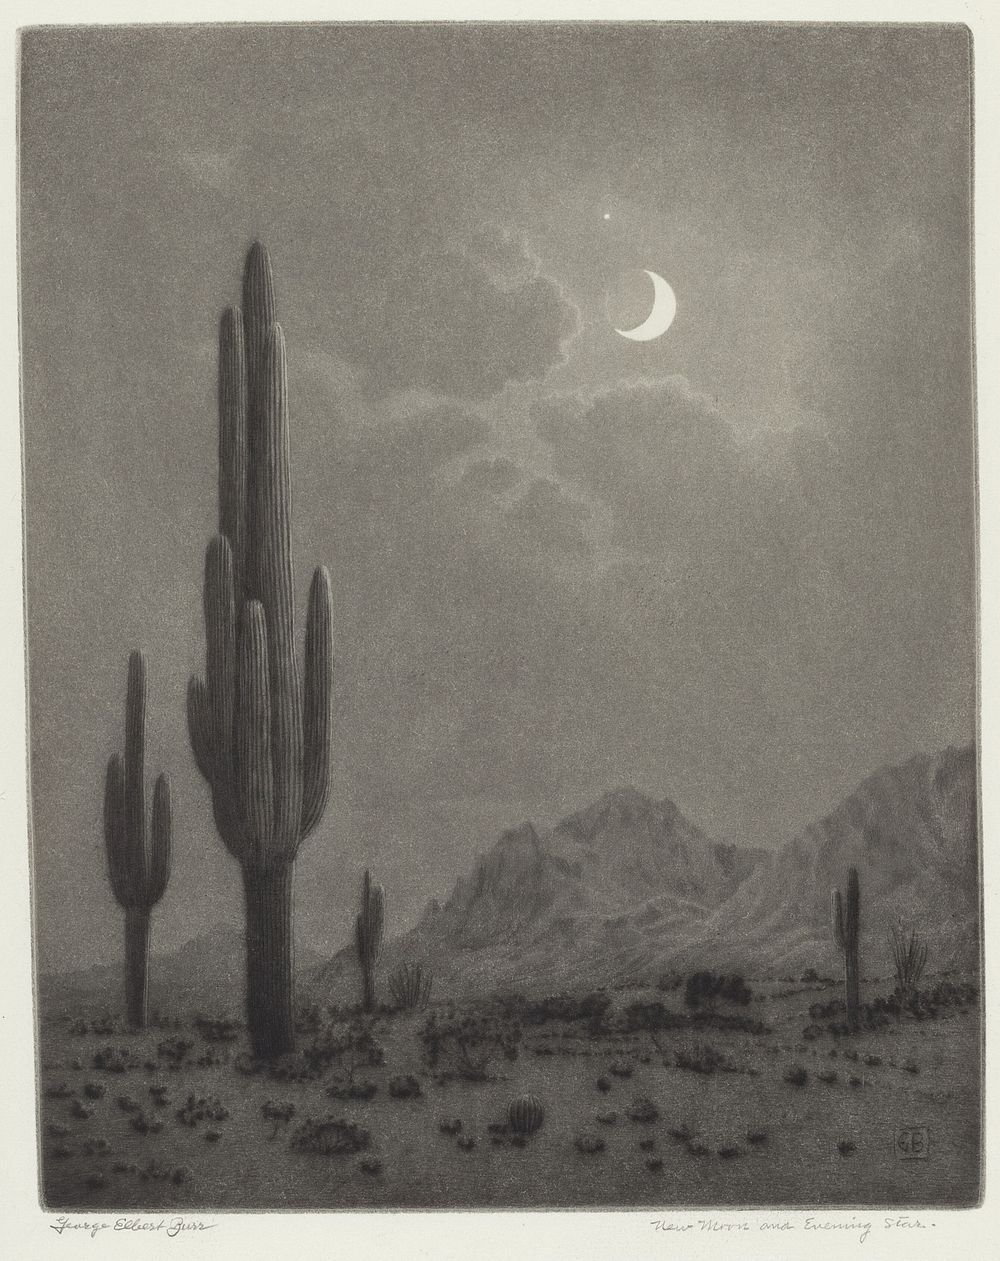 New Moon and Evening Star (ca. 1923) by George Elbert Burr.  